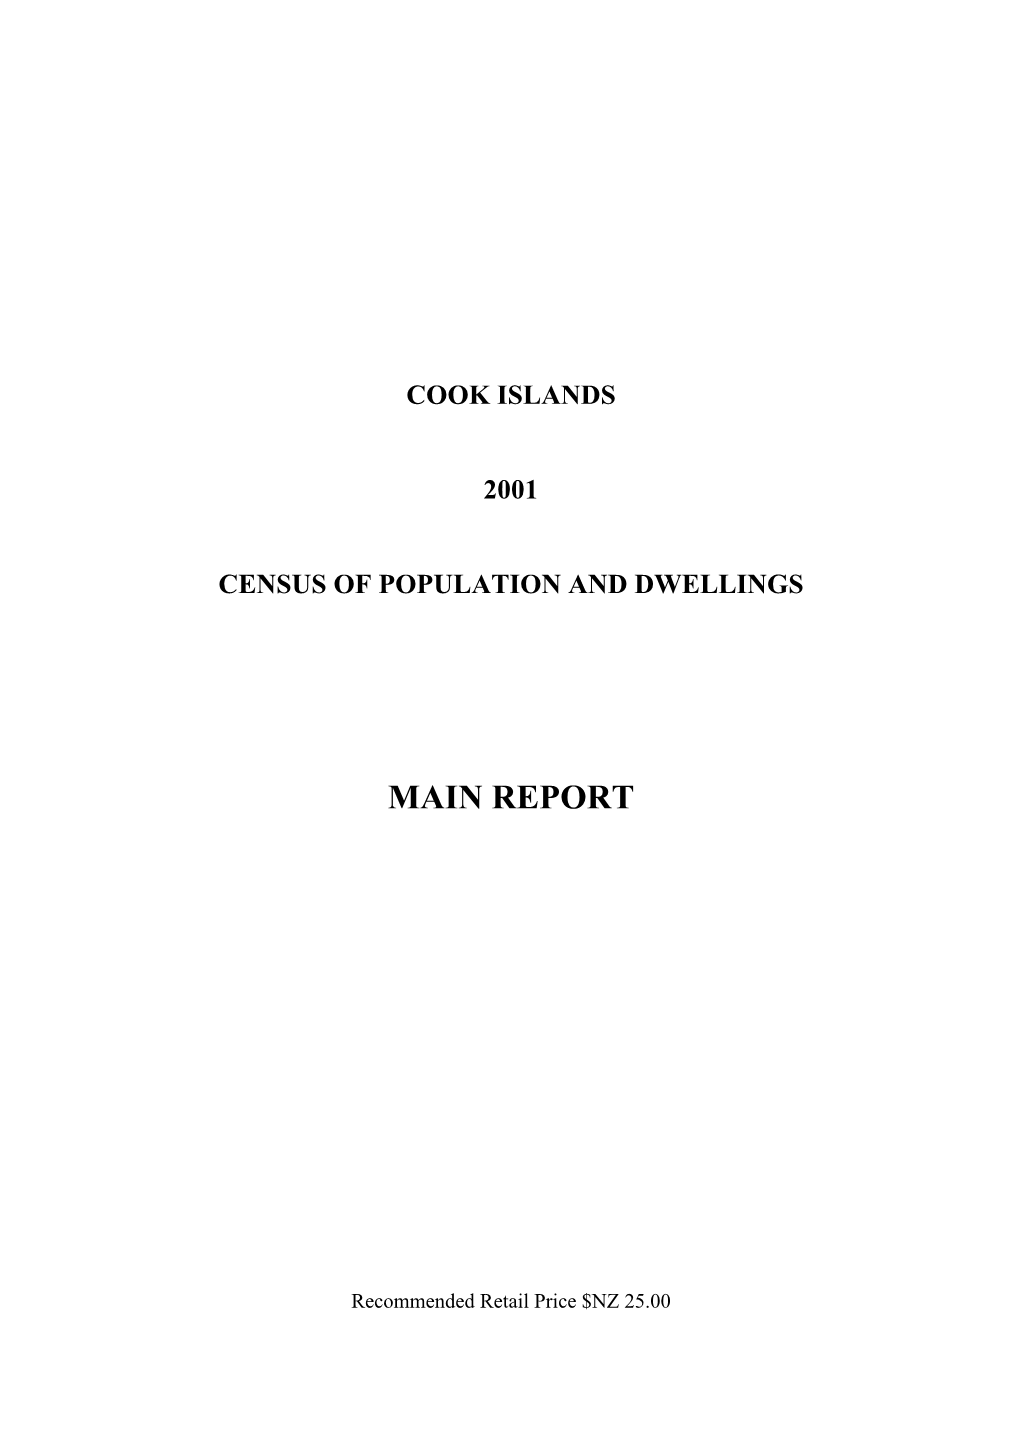 Cook Islands 2001 Census of Population and Dwellings